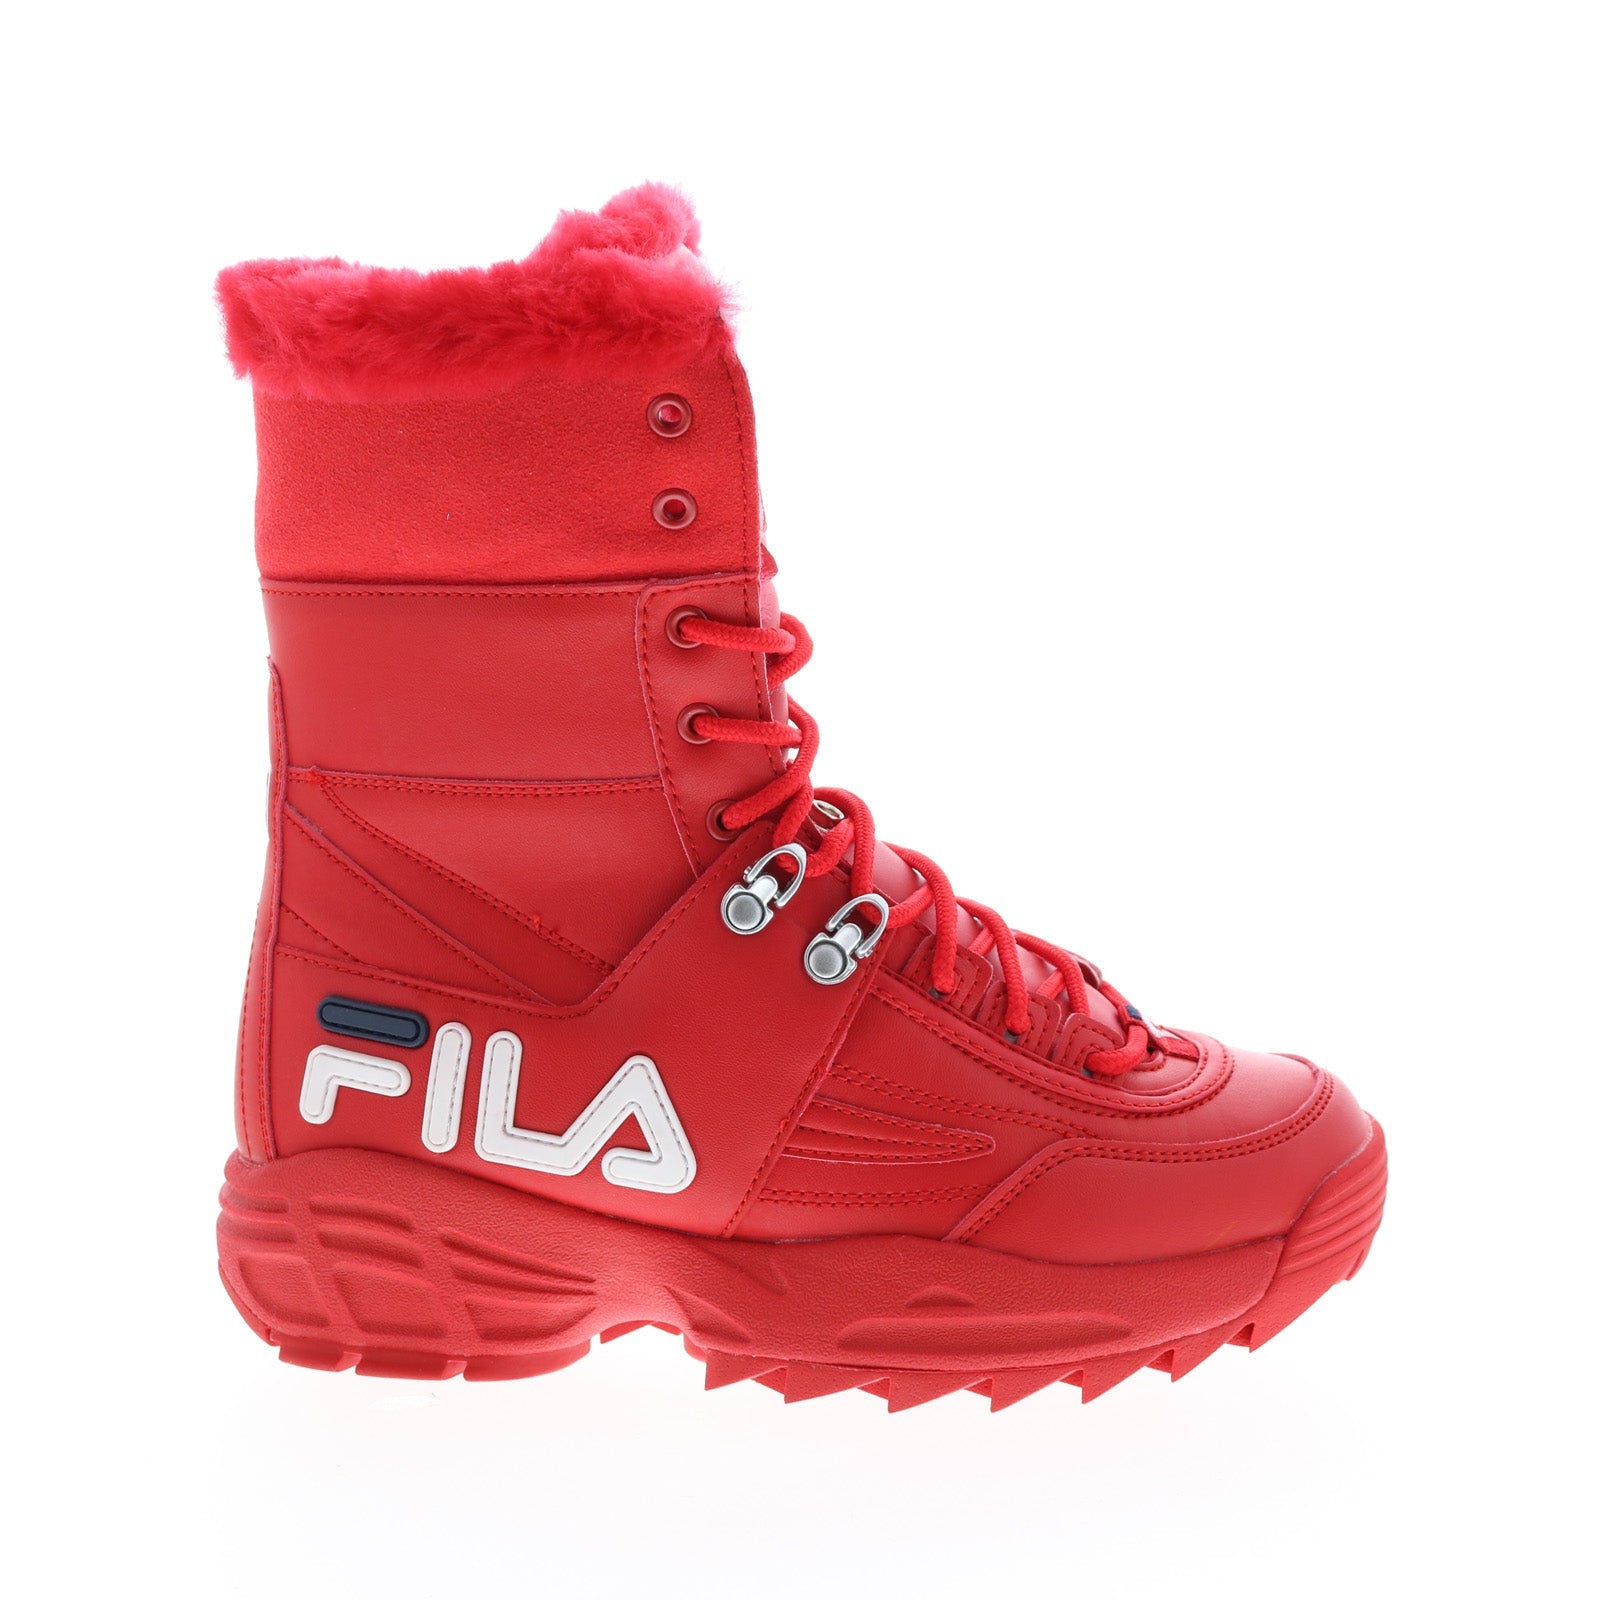 Fila Disruptor Boot 5HM00560-616 Womens Red Leather Casual Dress - Ruze Shoes